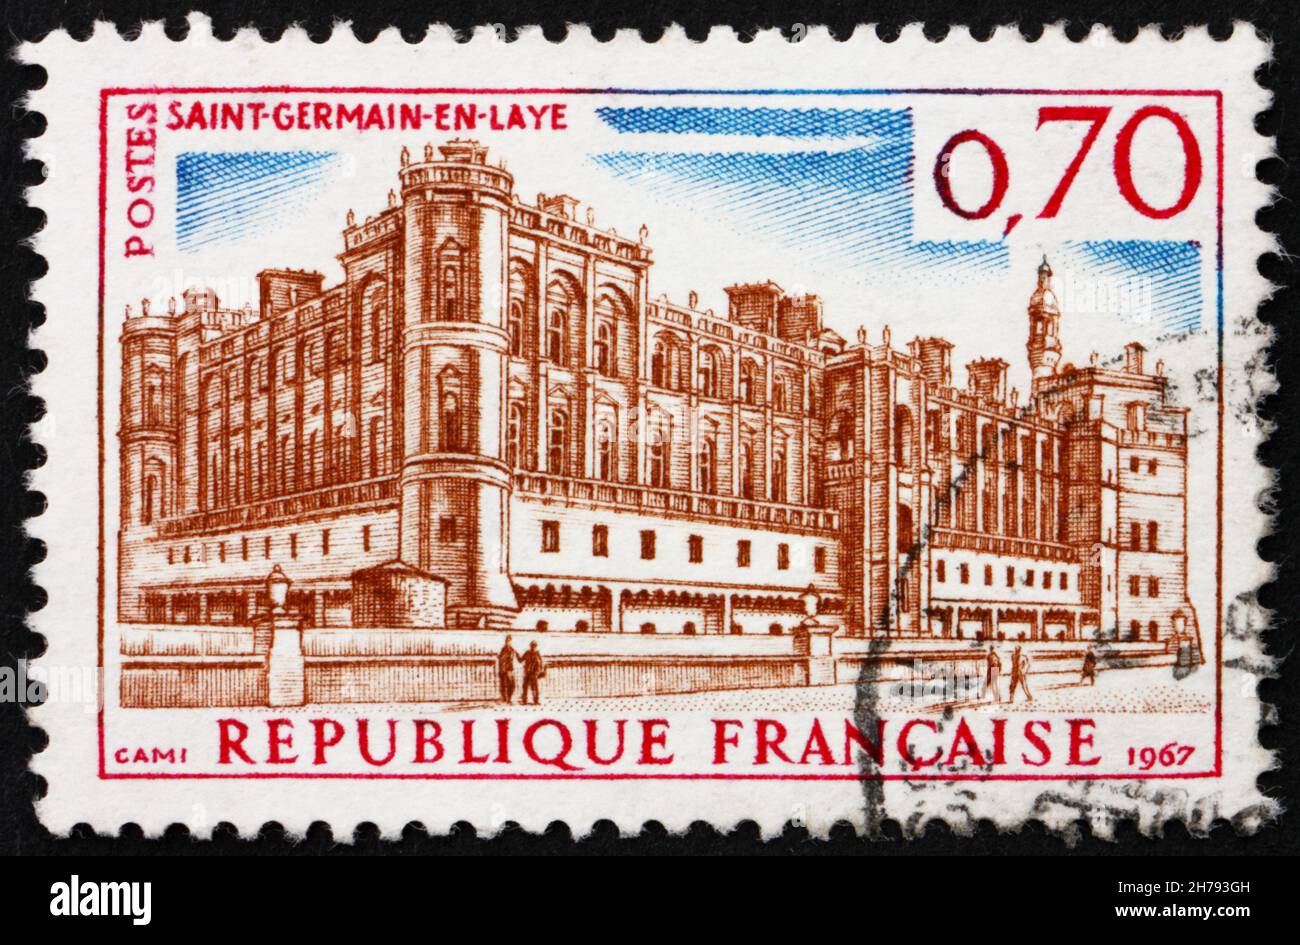 FRANCE - CIRCA 1967: a stamp printed in the France shows Chateau Saint Germain en Laye, France, circa 1967 Stock Photo